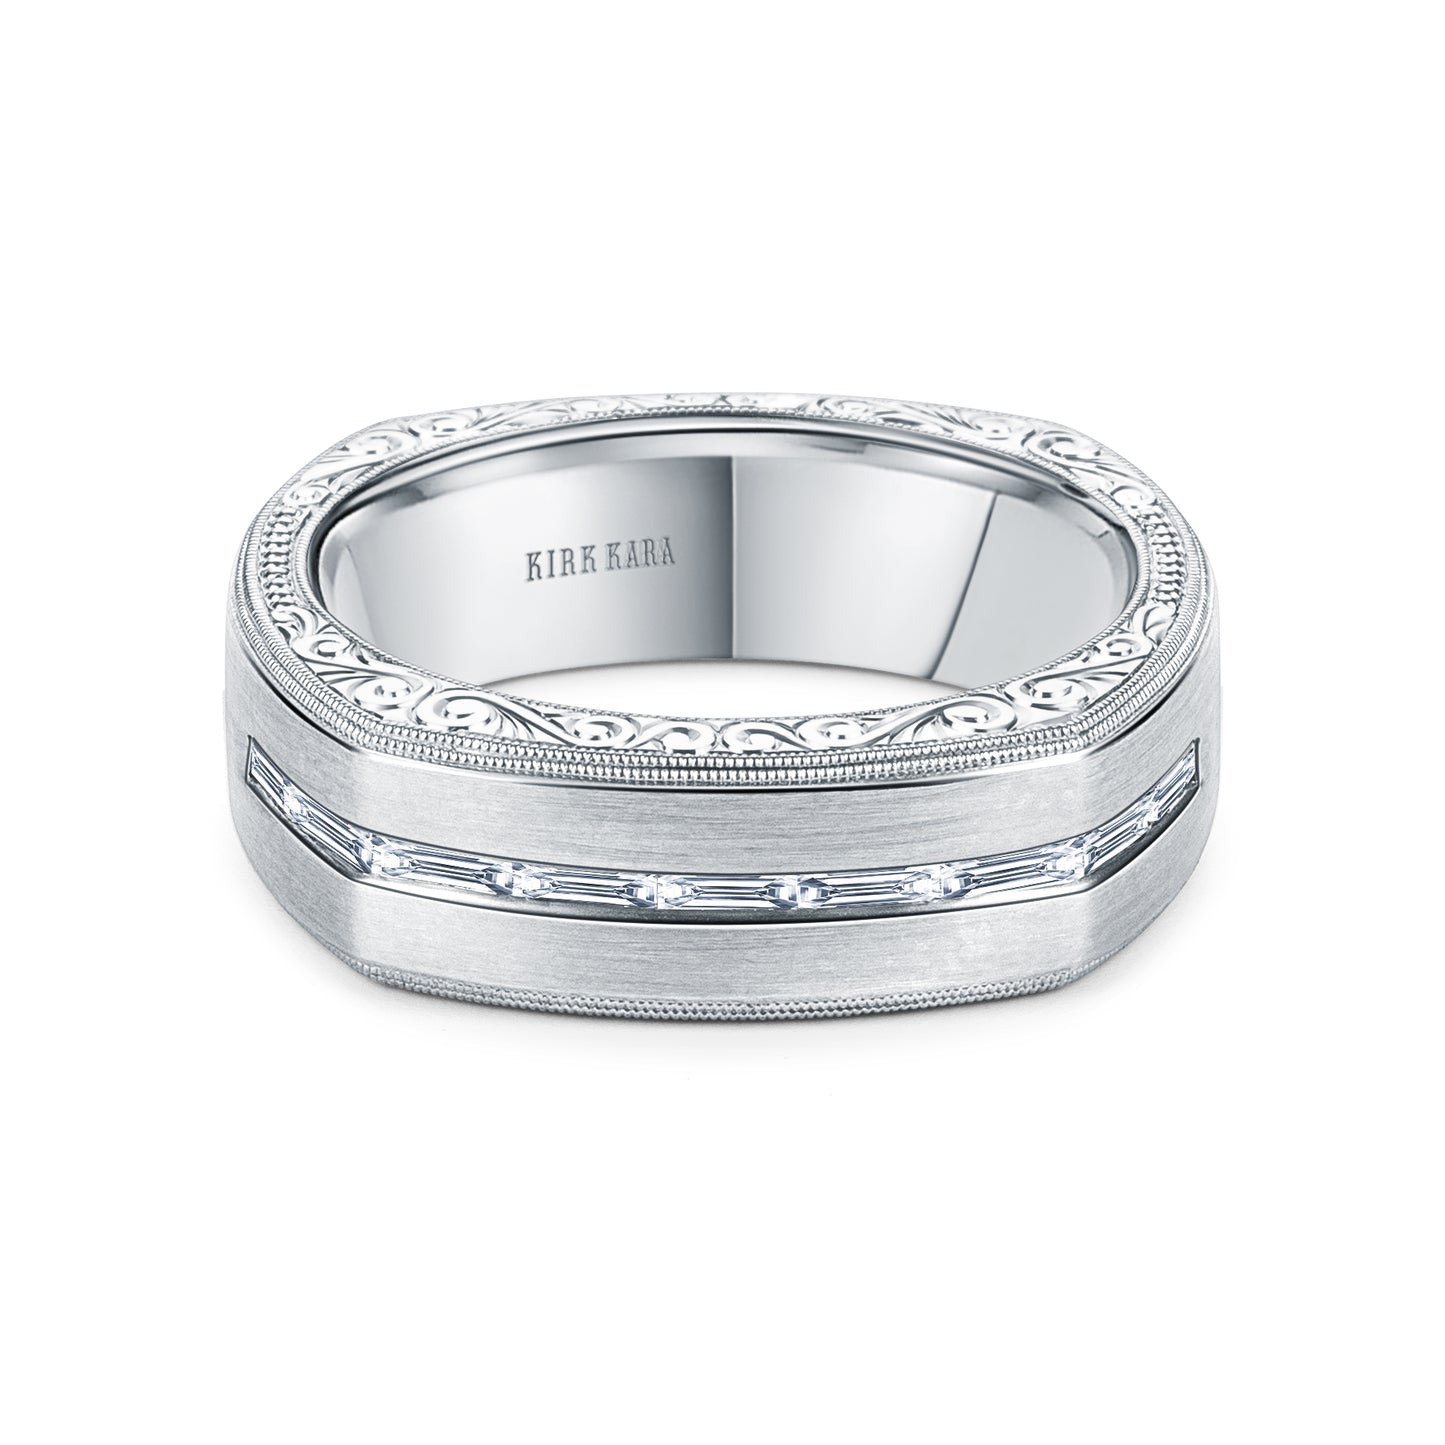 Square Baguette Diamond Engraved Wedding Band, 7mm